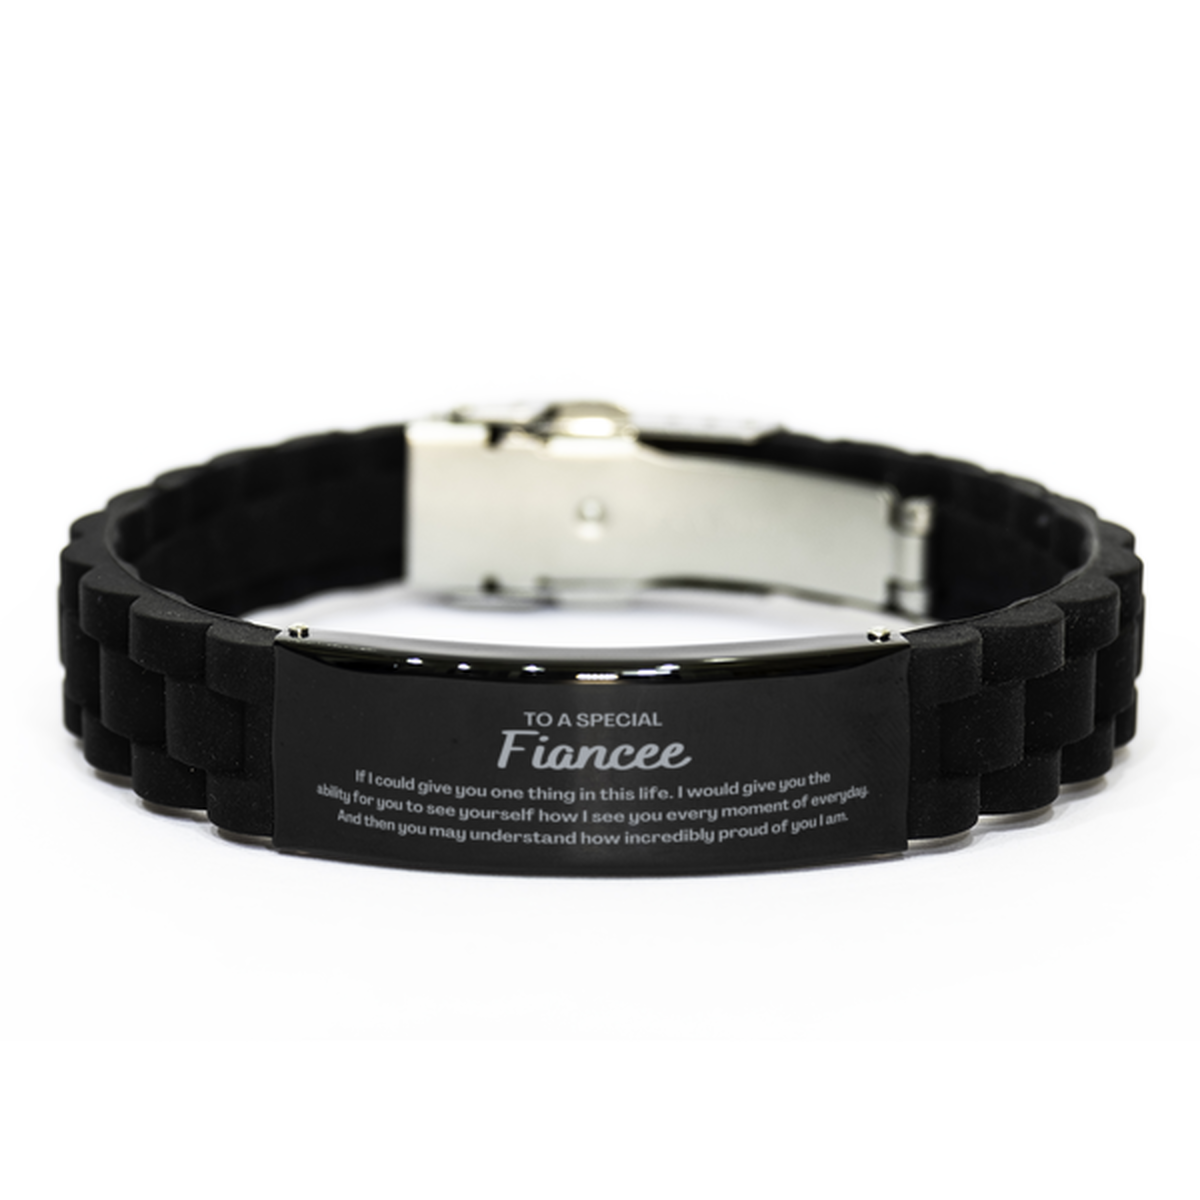 To My Fiancee Black Glidelock Clasp Bracelet, Gifts For Fiancee Engraved, Inspirational Gifts for Christmas Birthday, Epic Gifts for Fiancee To A Special Fiancee how incredibly proud of you I am